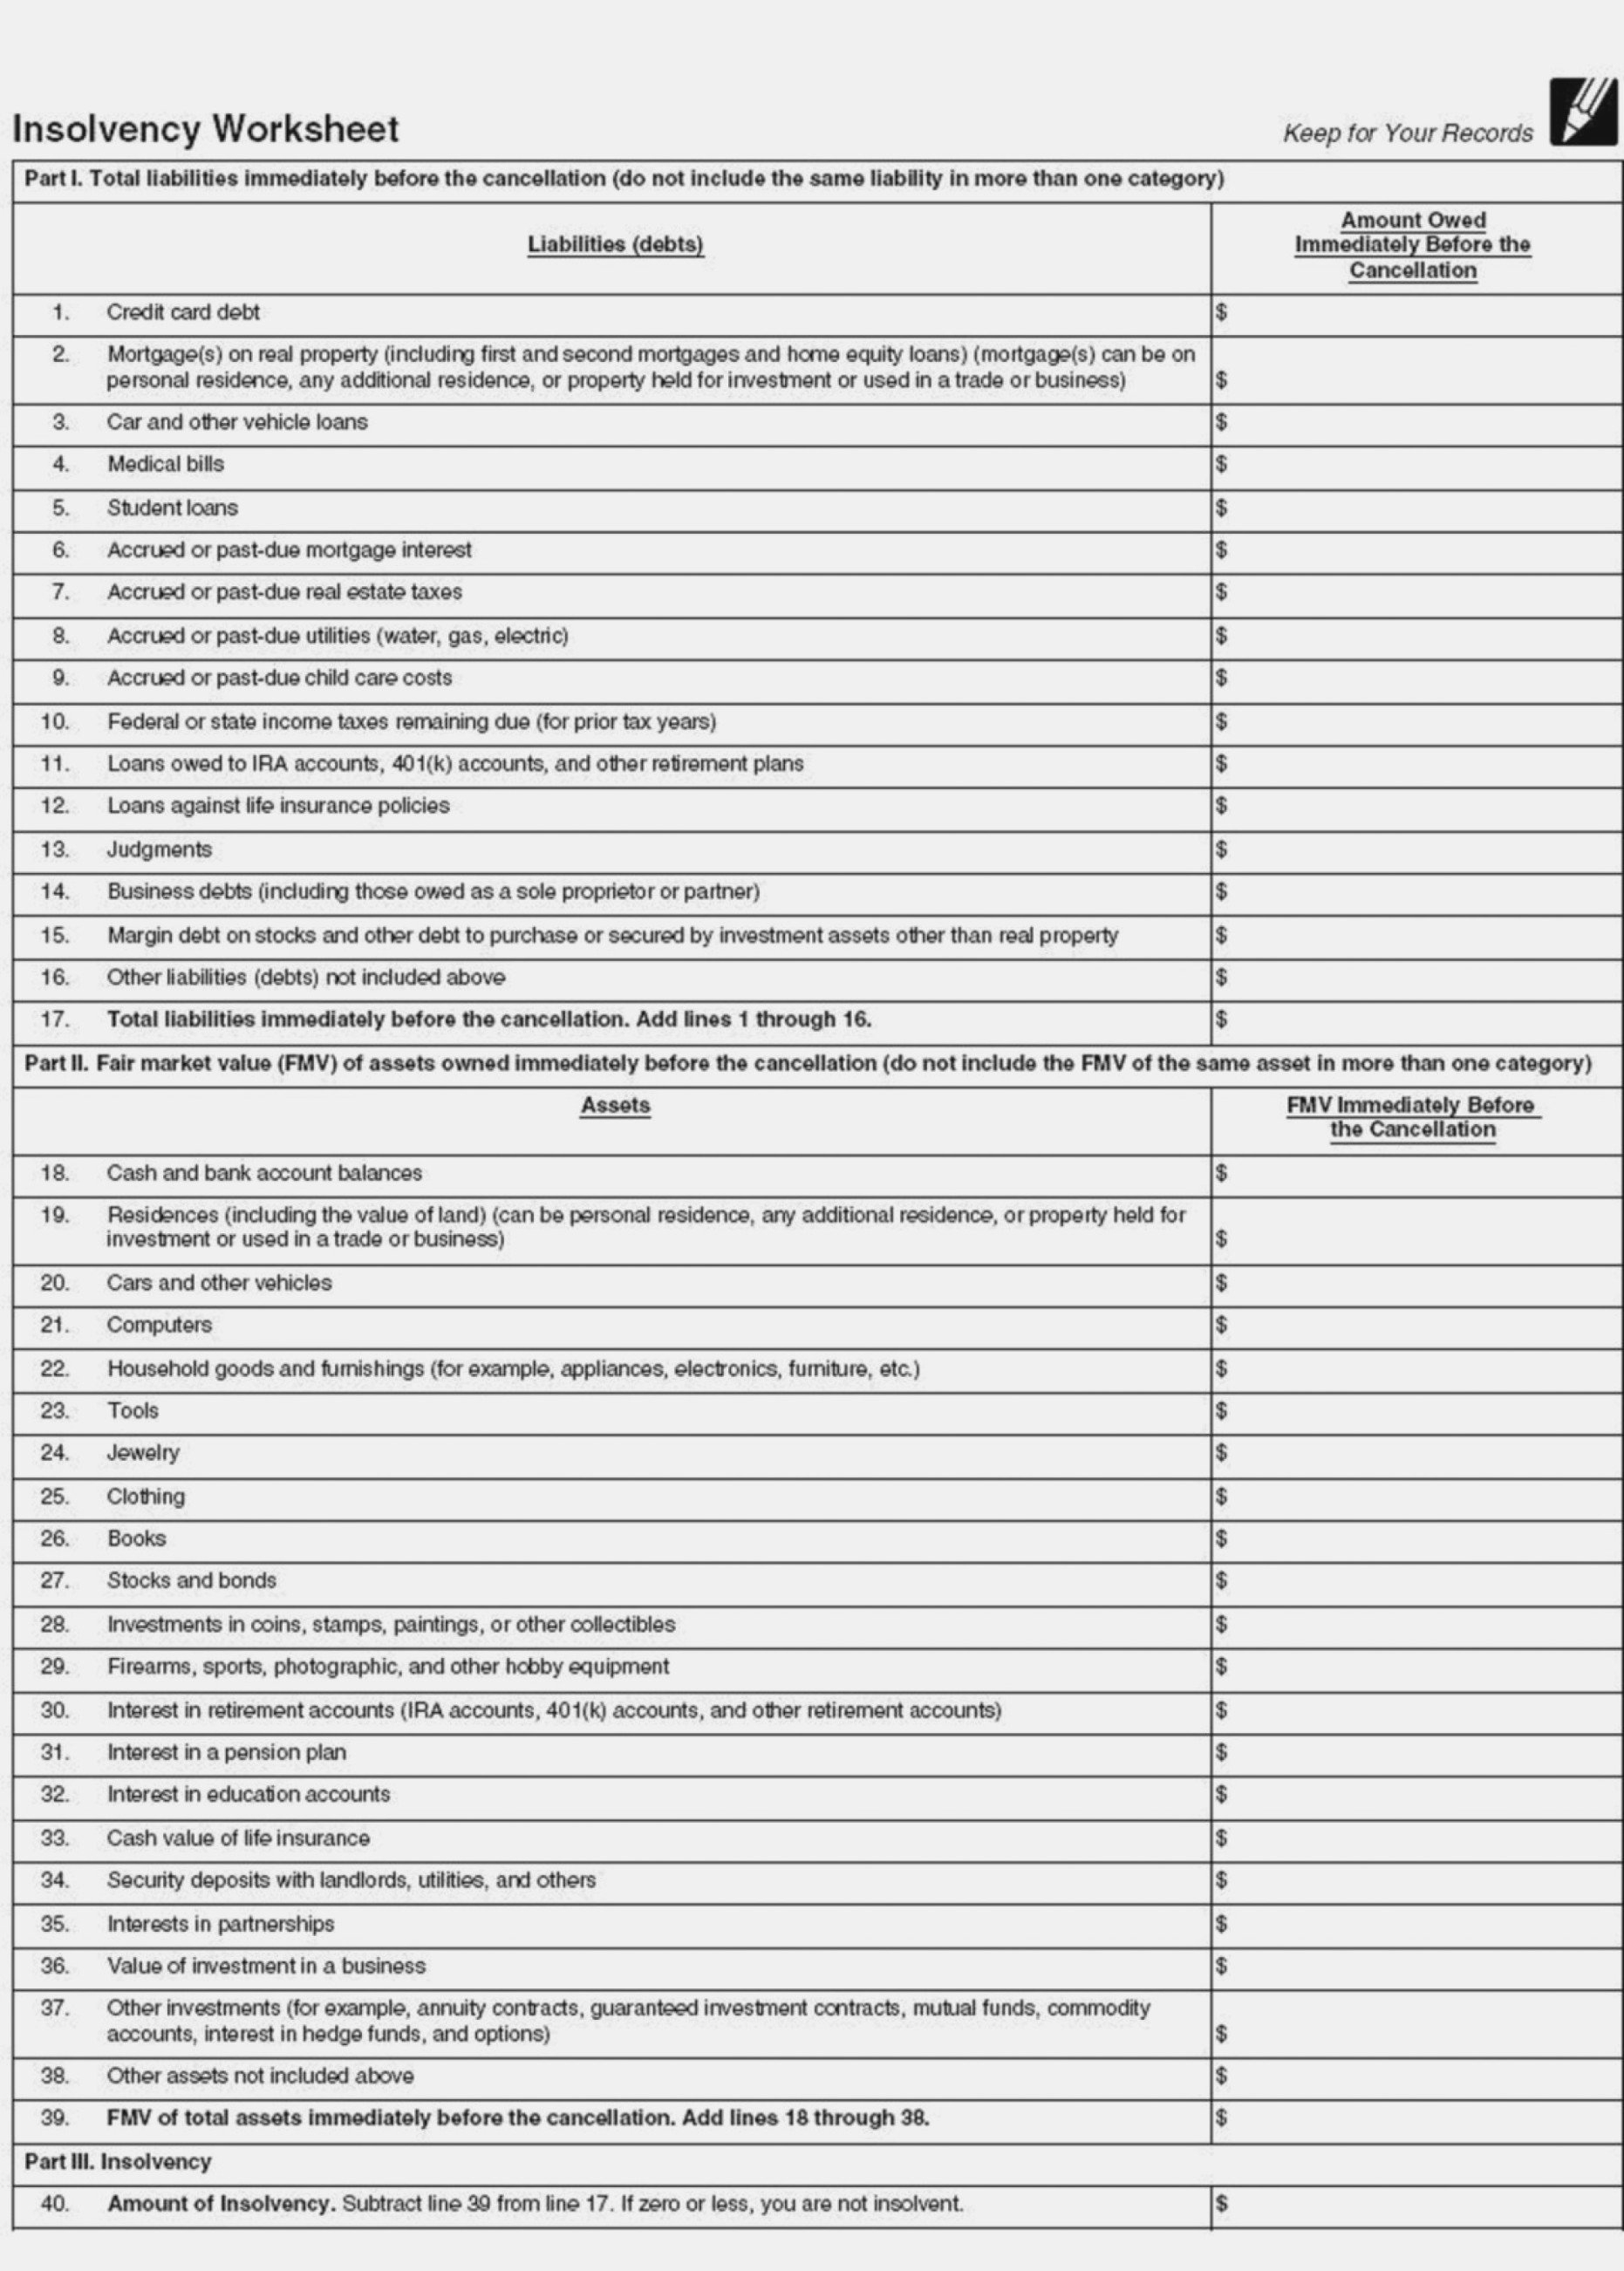 Example Insolvency Worksheet Irs – Livinghealthybulletin – Irs Form And Irs Insolvency Worksheet